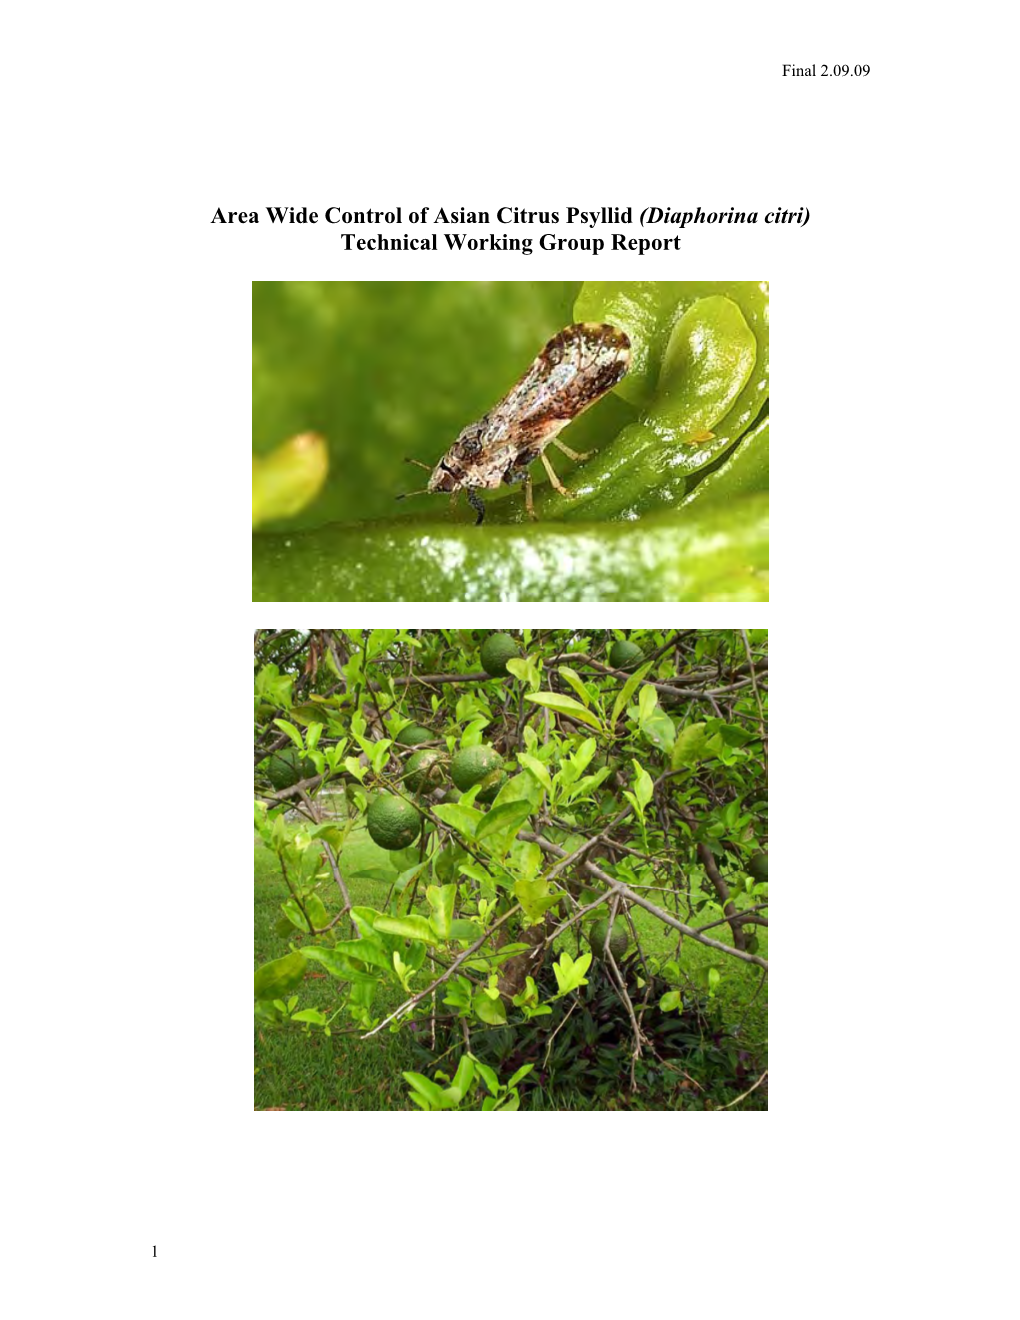 Psyllid Area Wide Control Technical Working Group Report 12/5/2008